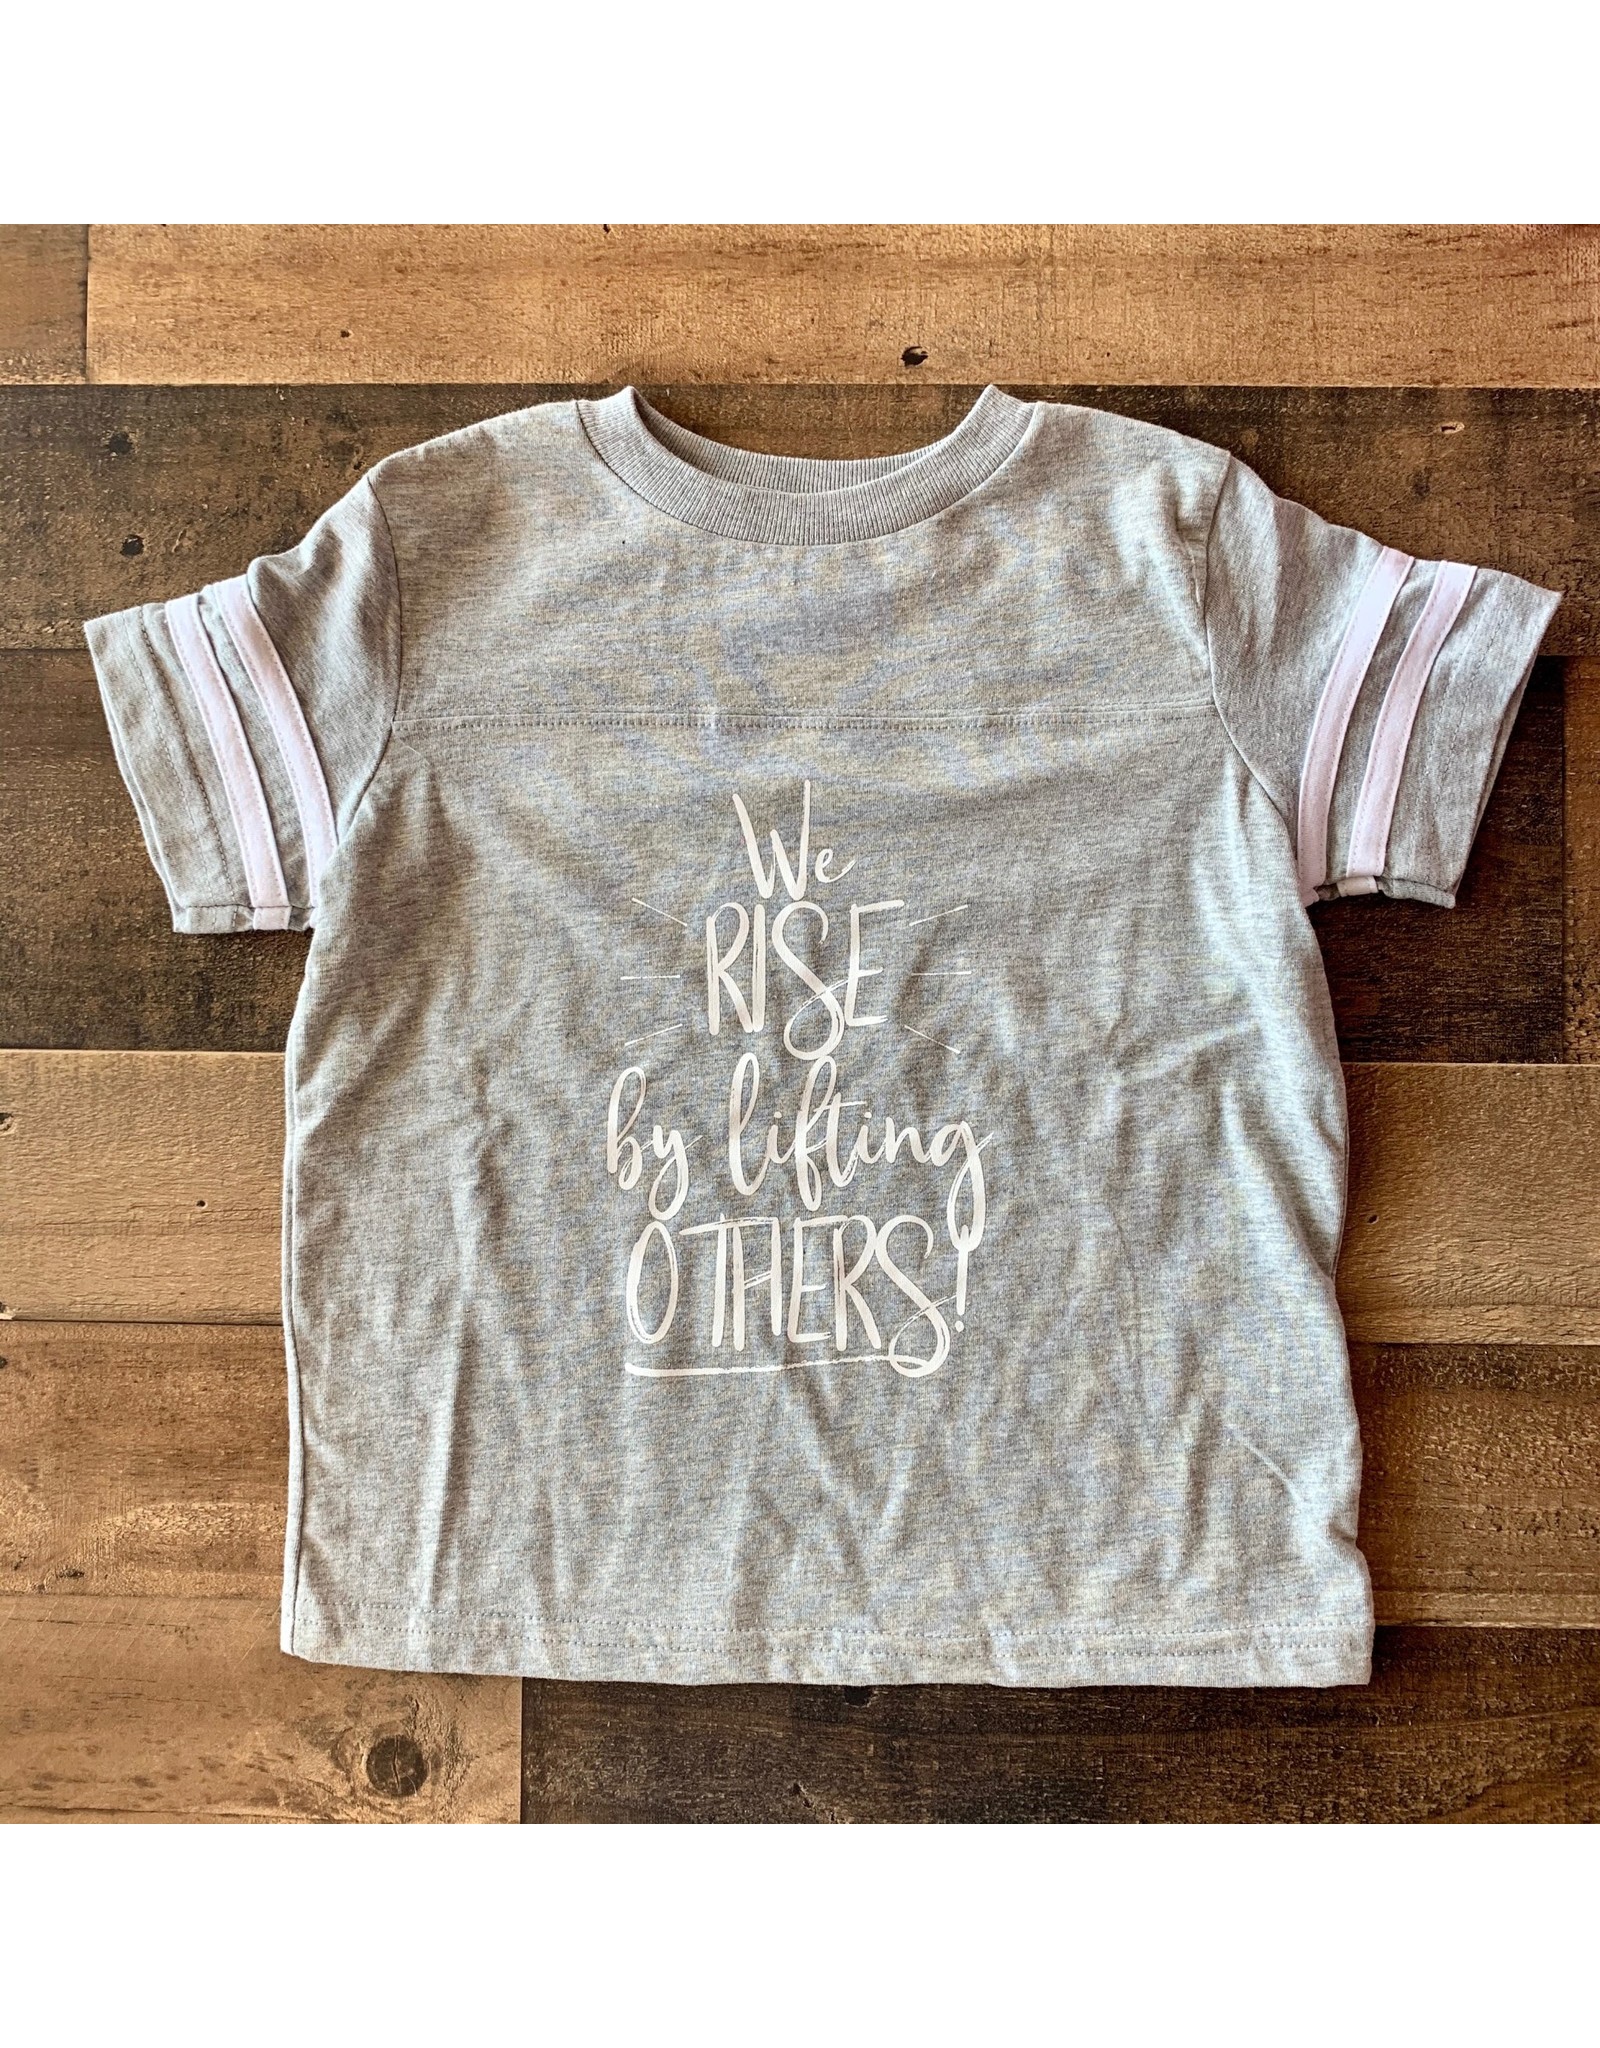 We Rise by Lifting Others Shirt: Heather Grey